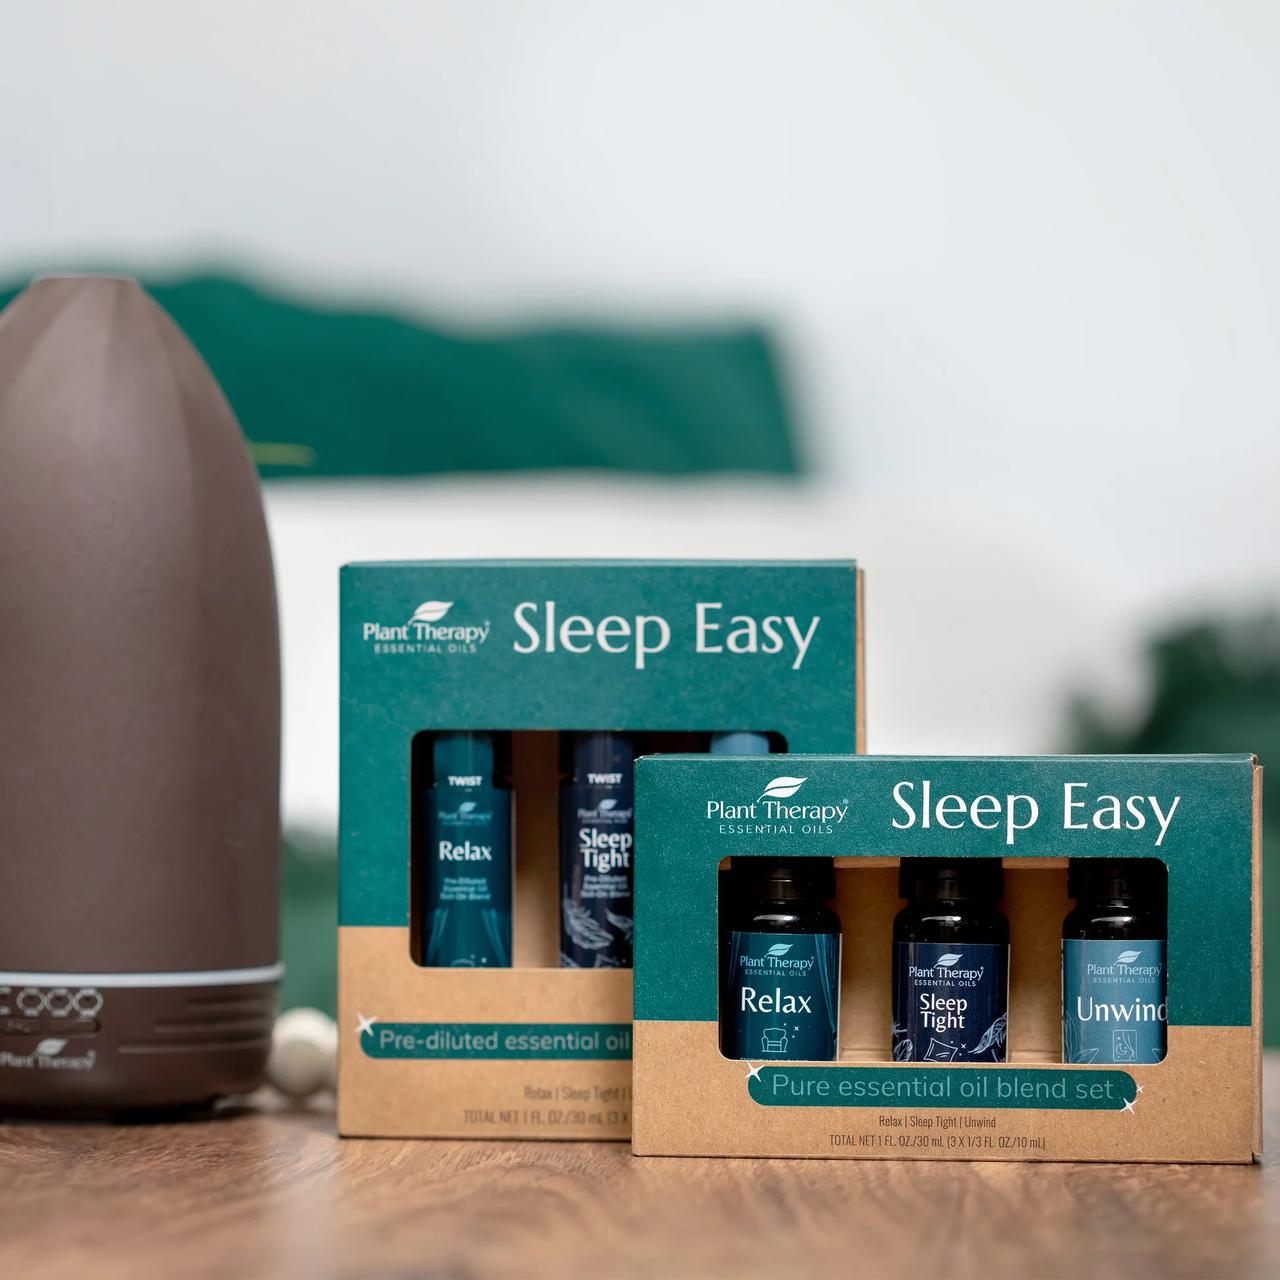 Sleep Easy Essential Oil Blend Roll On Set - Plant Therapy